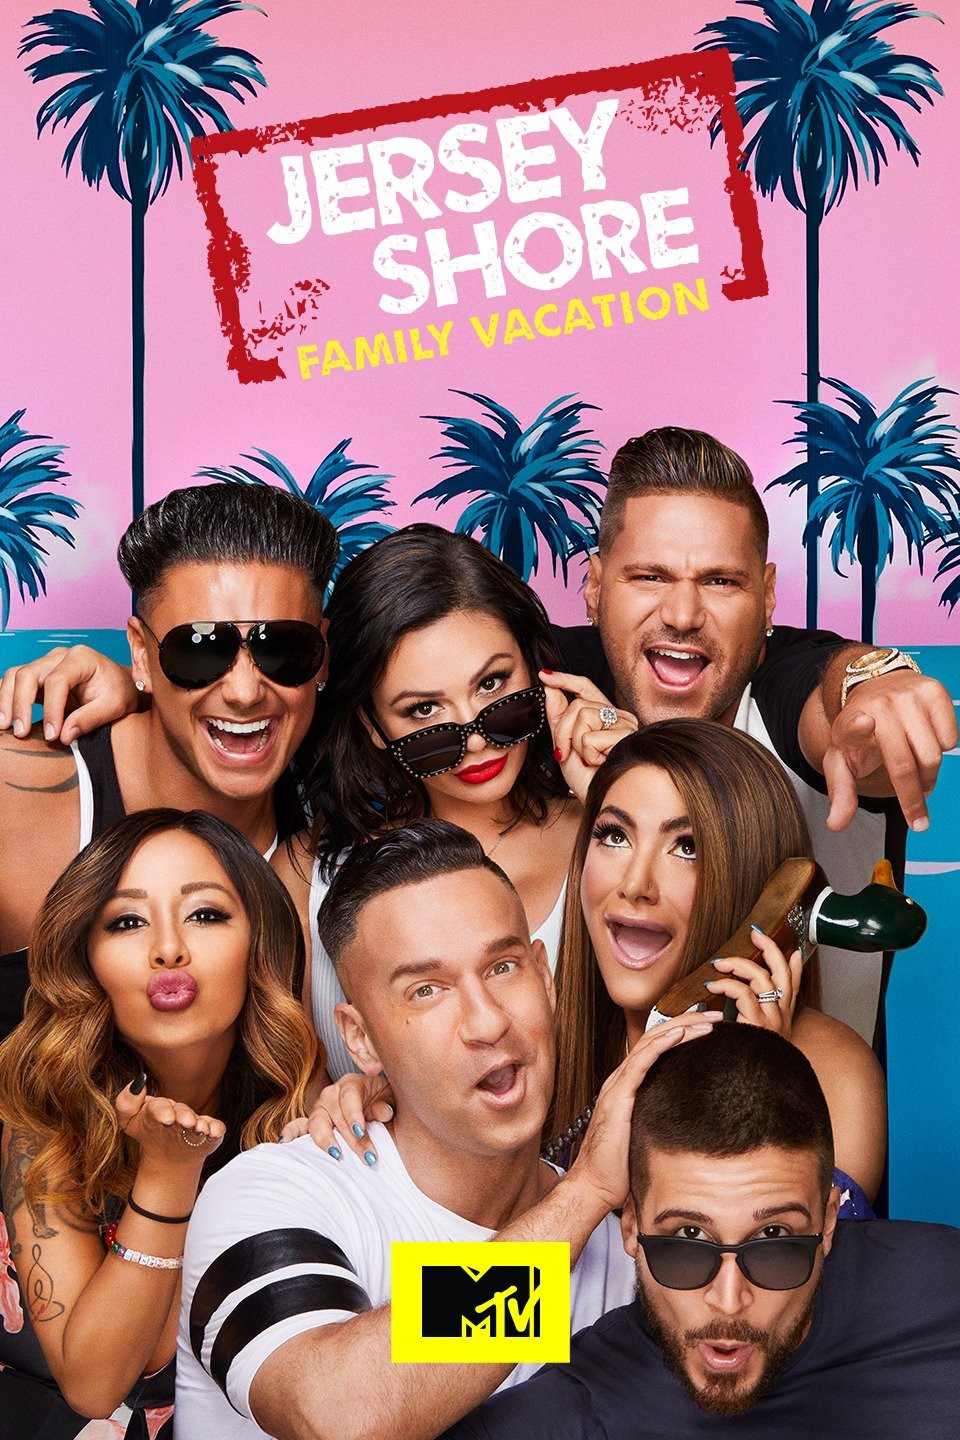 Traditioneel Saai straffen Jersey Shore: Family Vacation - Rotten Tomatoes